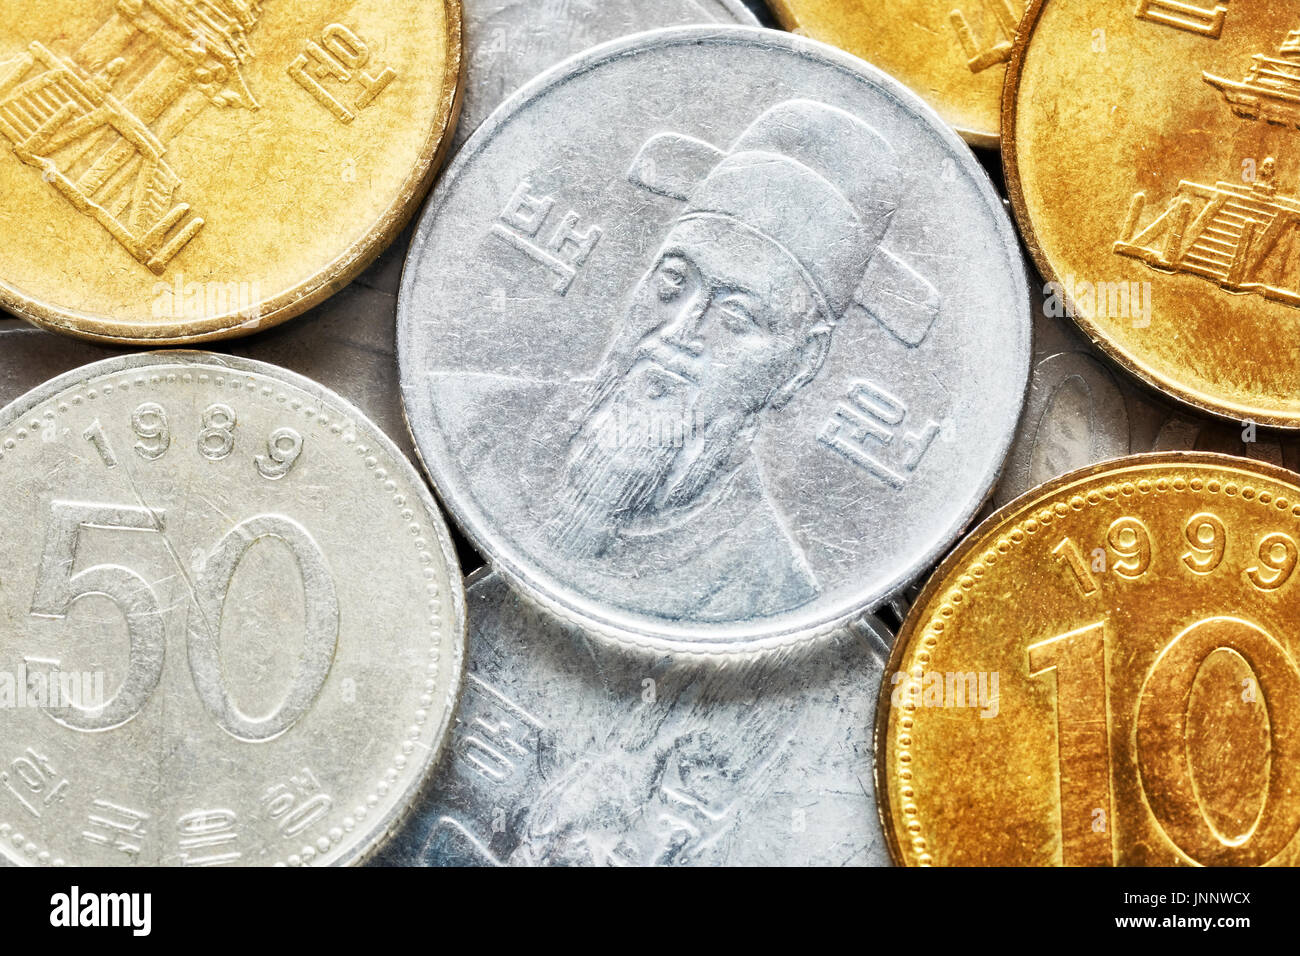 Extreme close up picture of South Korean won coins, shallow depth of field. Stock Photo